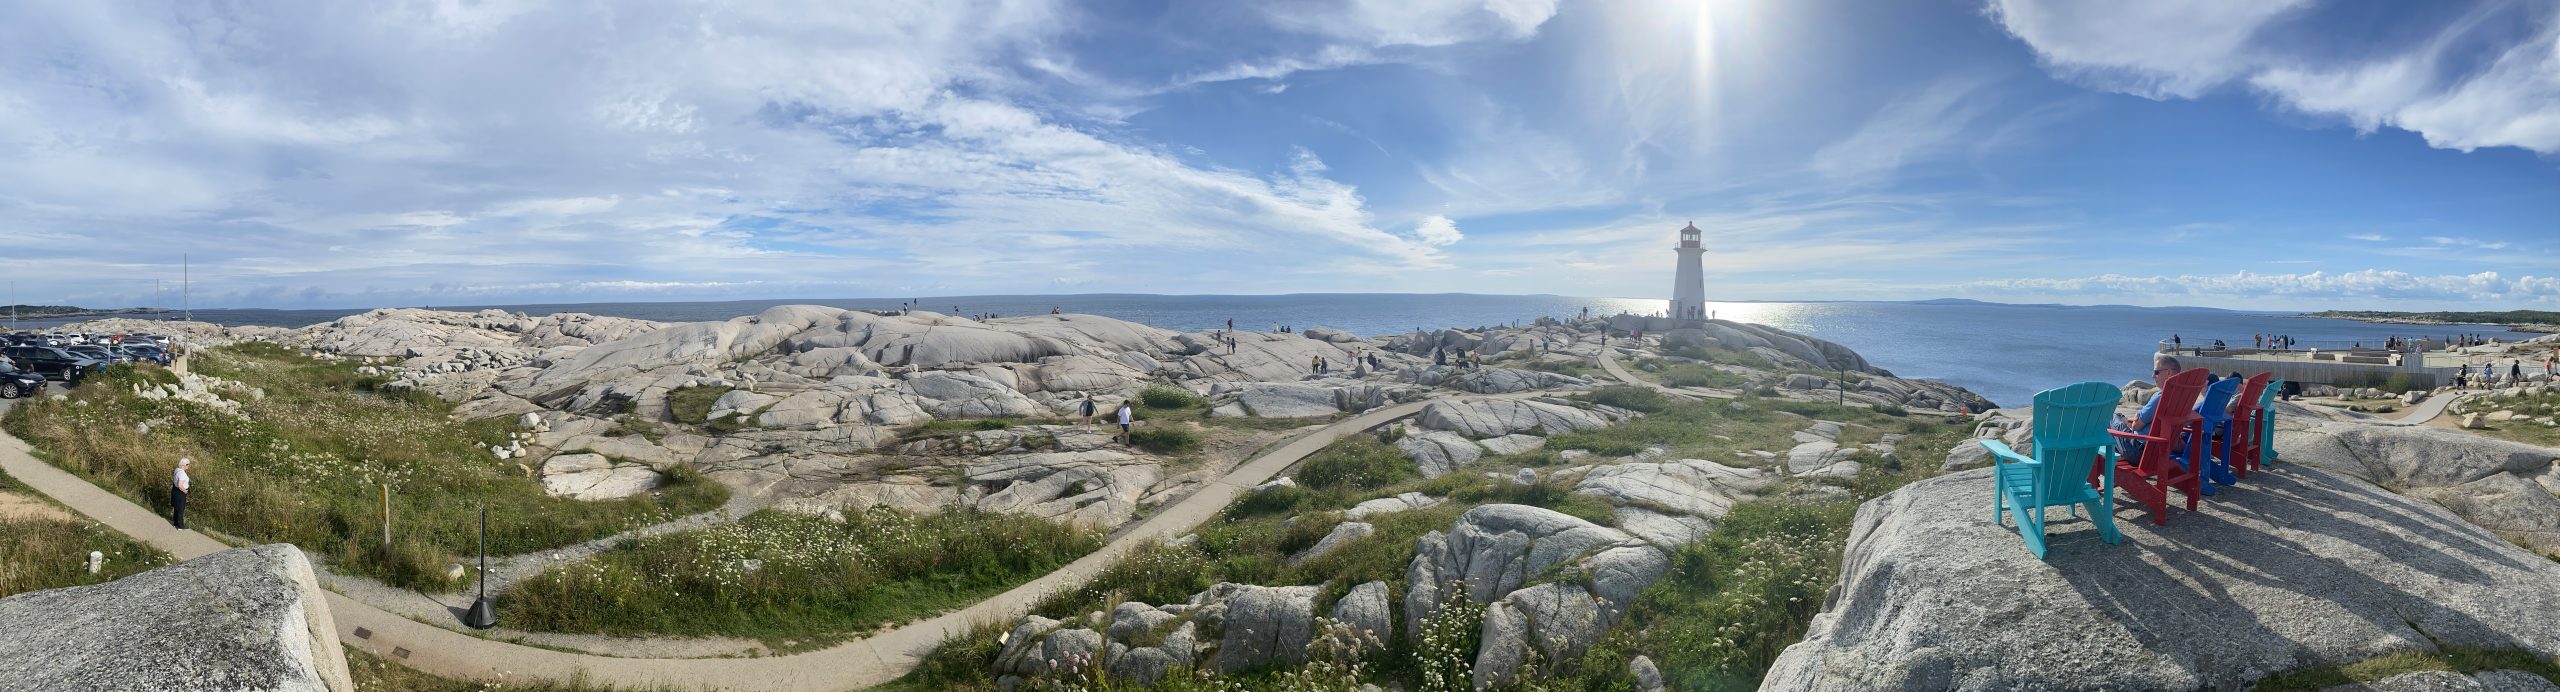 A panoramic view of the area surrounding the Peggy Cove lighthouse.